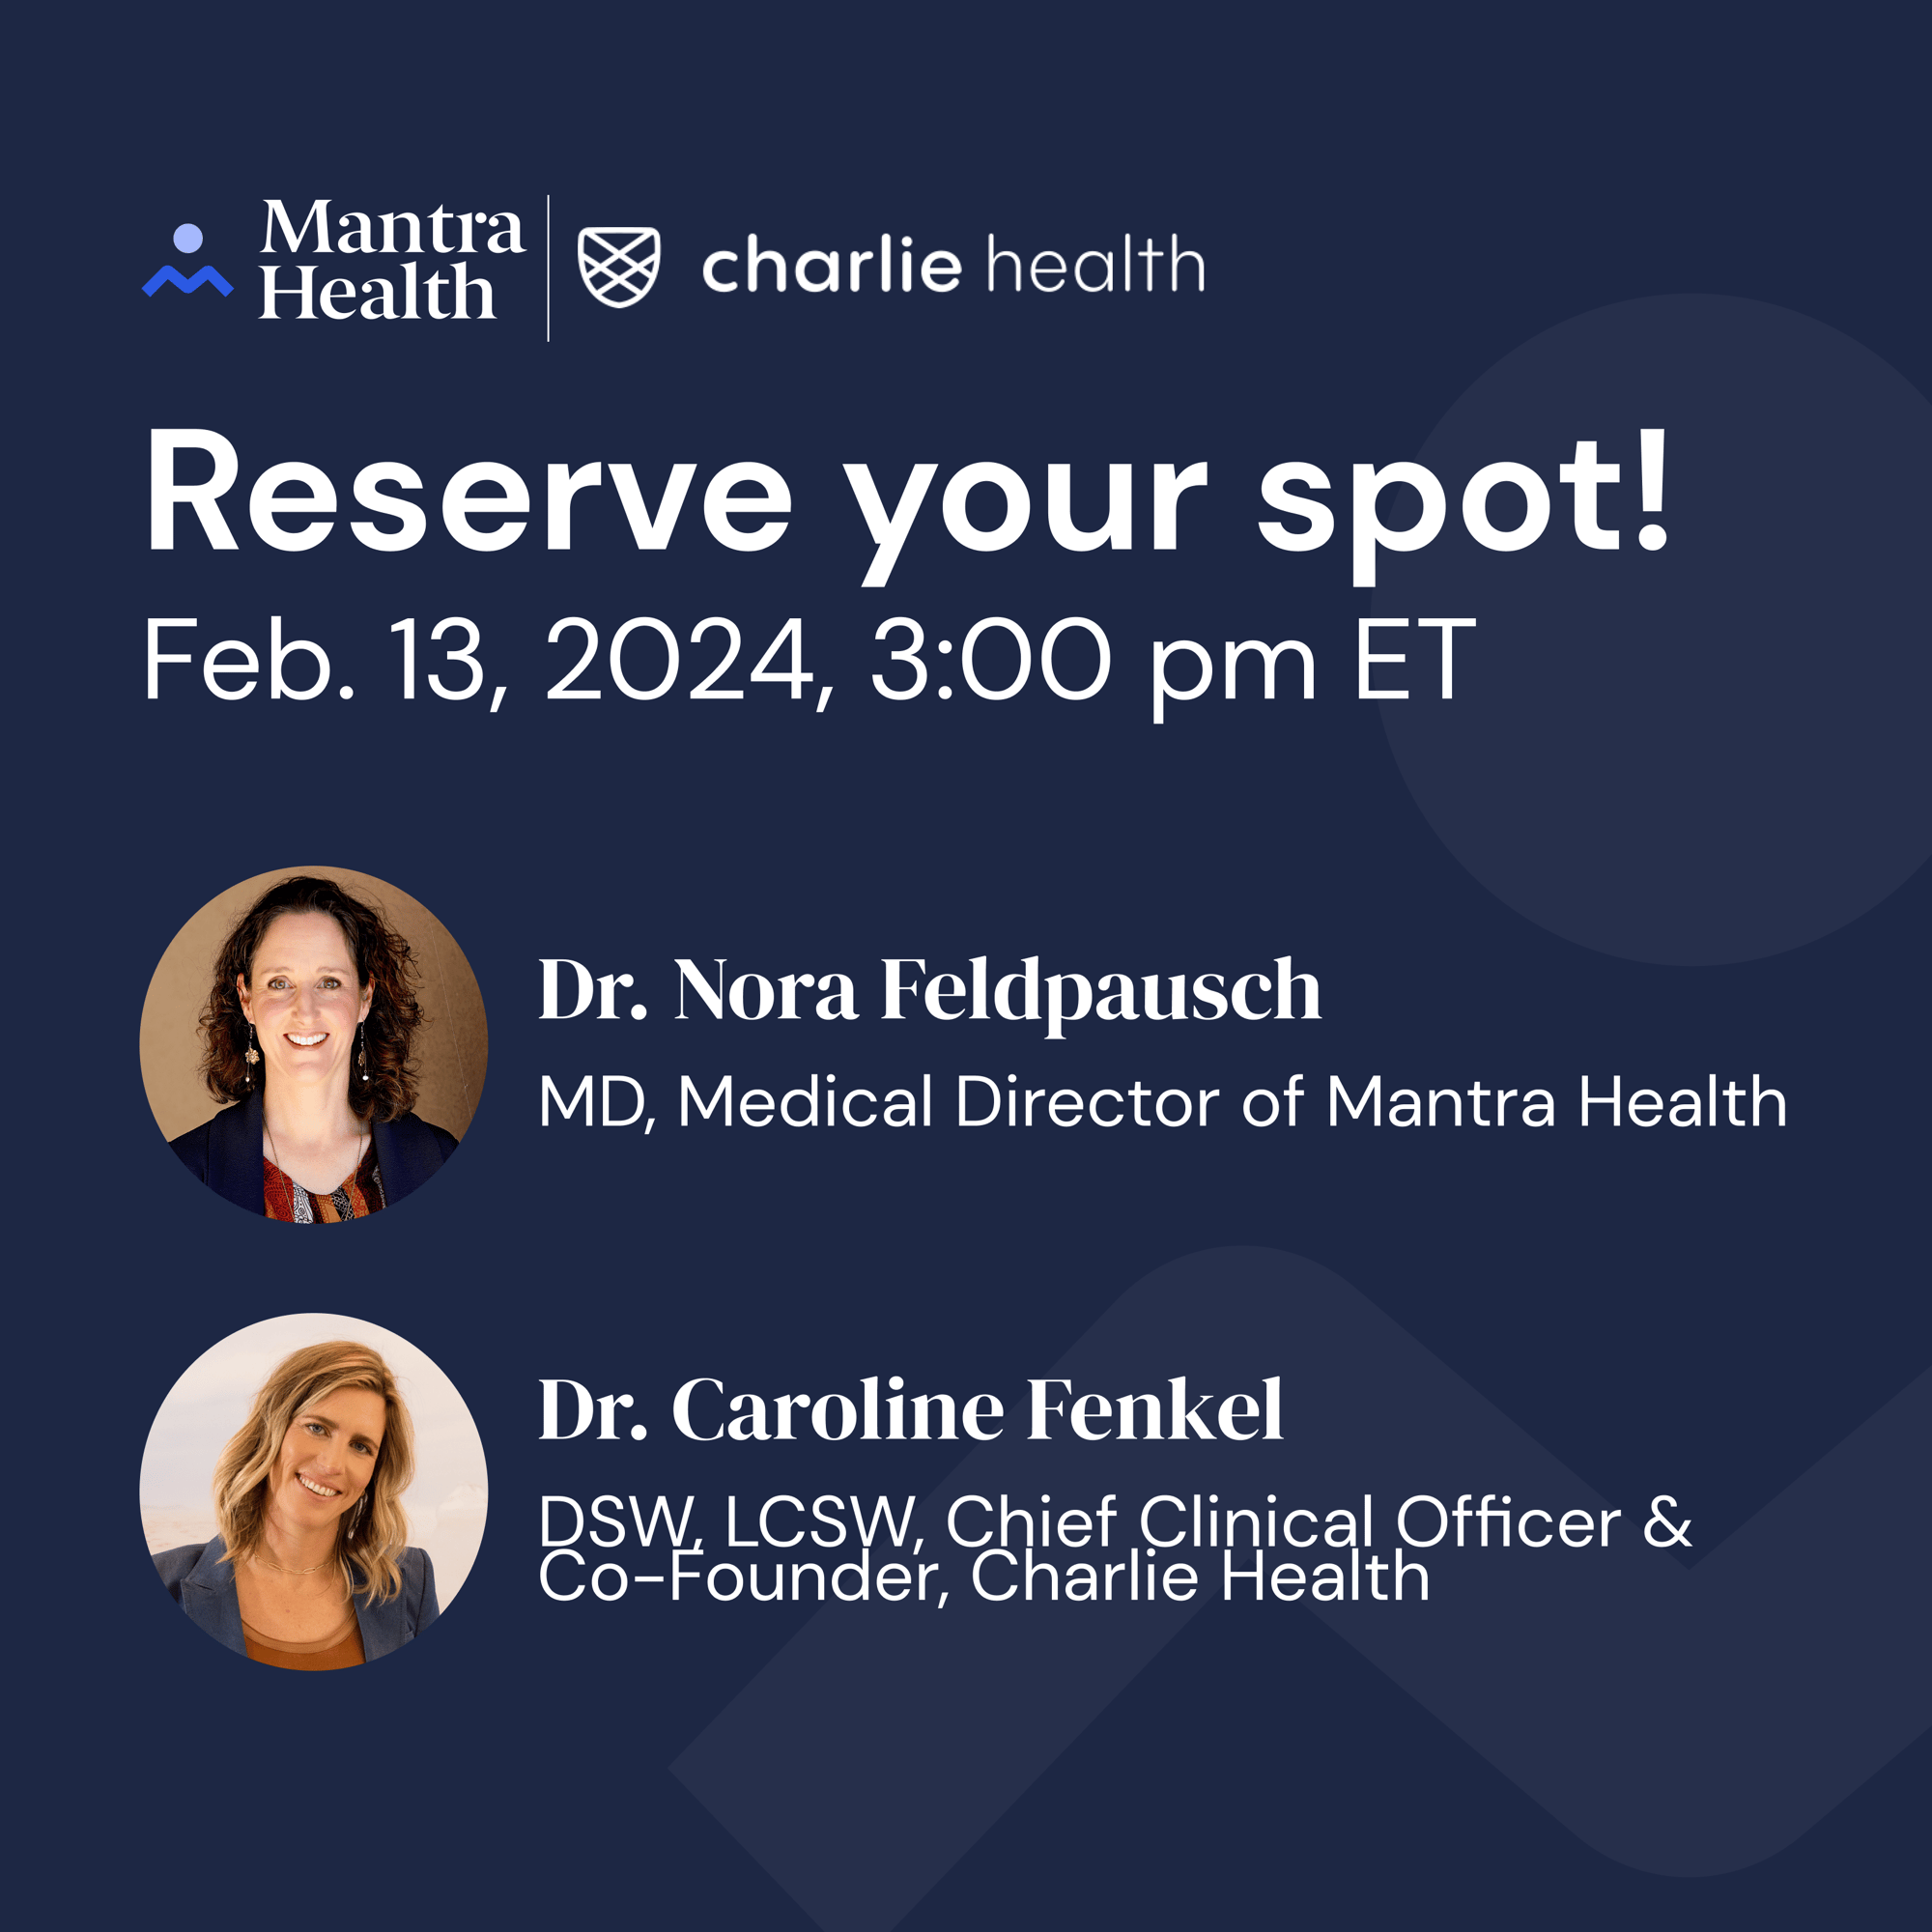 Mantra Health & Charlie Health | Reserve Your Spot! Feb 13, 2024, 3:00pm ET with Dr. Nora Feldpausch and Dr. Caroline Fenkel